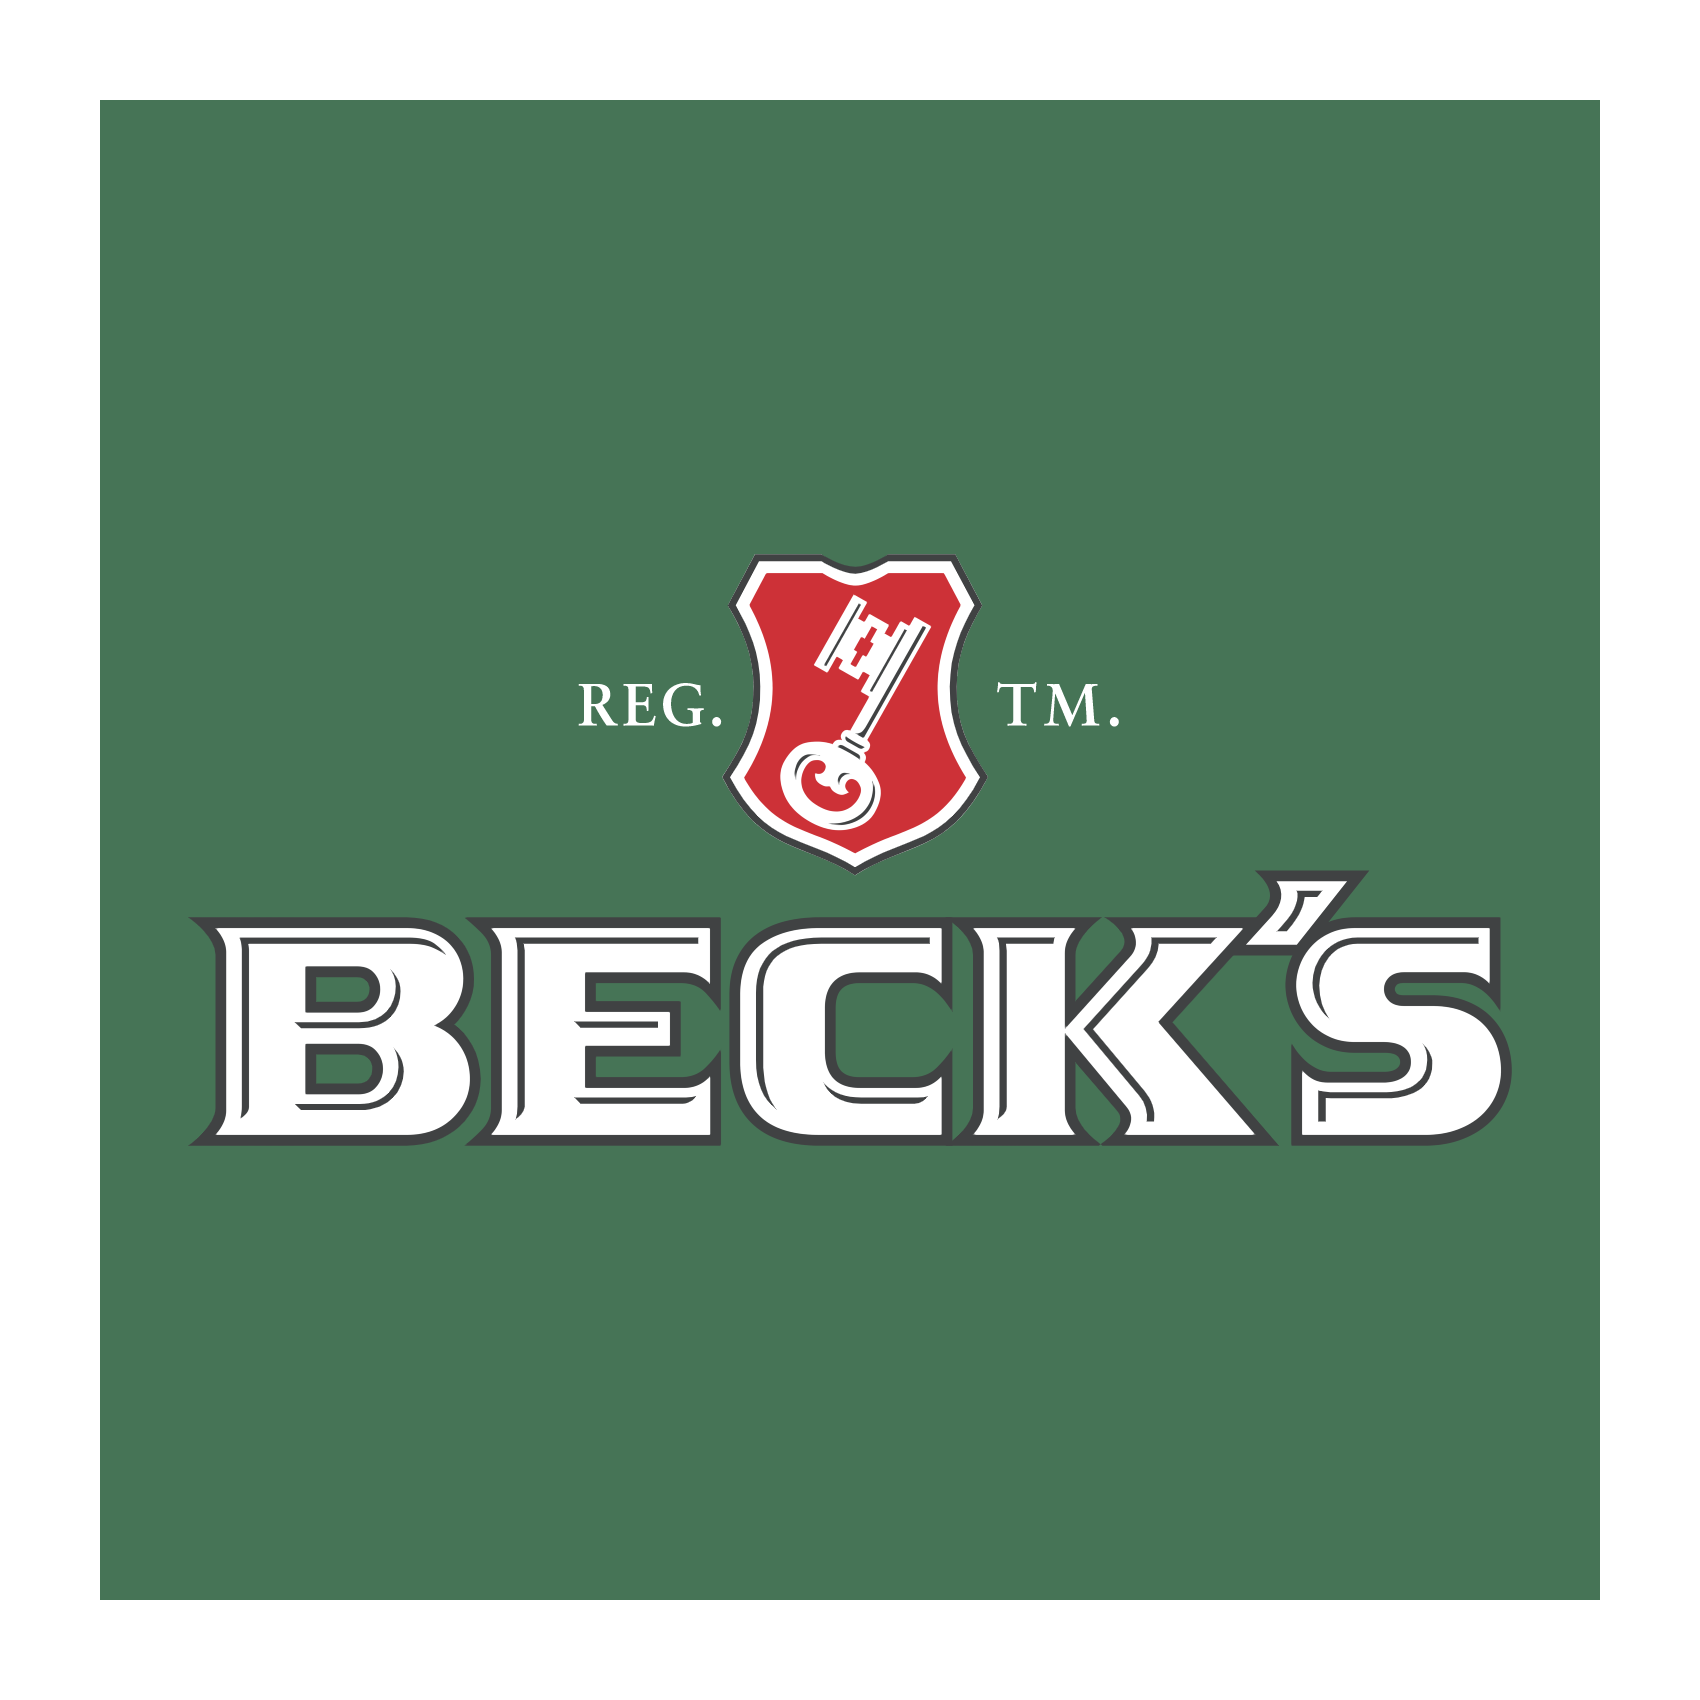 Download Beck's Logo PNG and Vector (PDF, SVG, Ai, EPS) Free